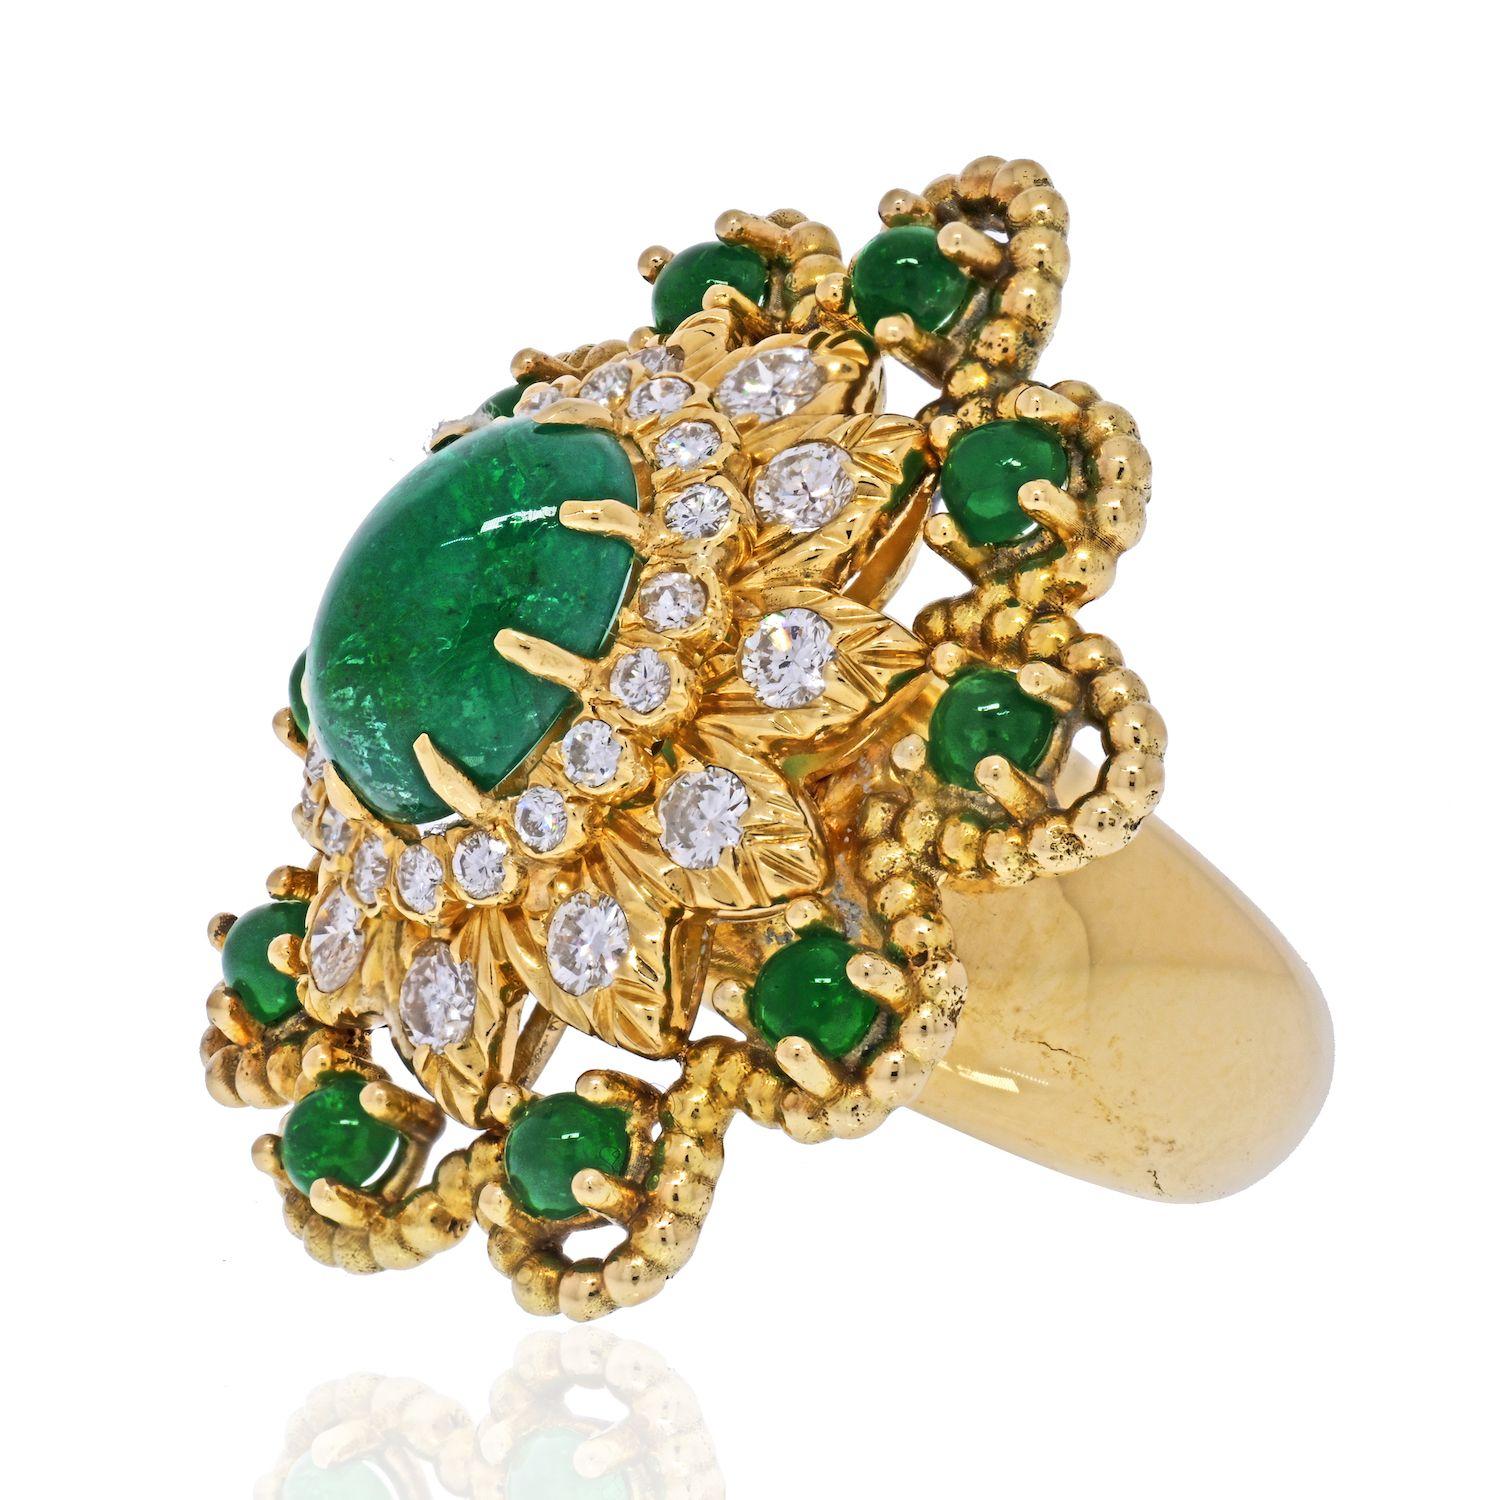 Exquisite David Webb 18K Yellow Gold Cabochon Emerald Diamond Flower Ring. 
Very rare vintage ring by David Webb that highlights an oval cut green cabochon emerald in the center center set in a halo of diamonds and surrounded by round cut cabochon